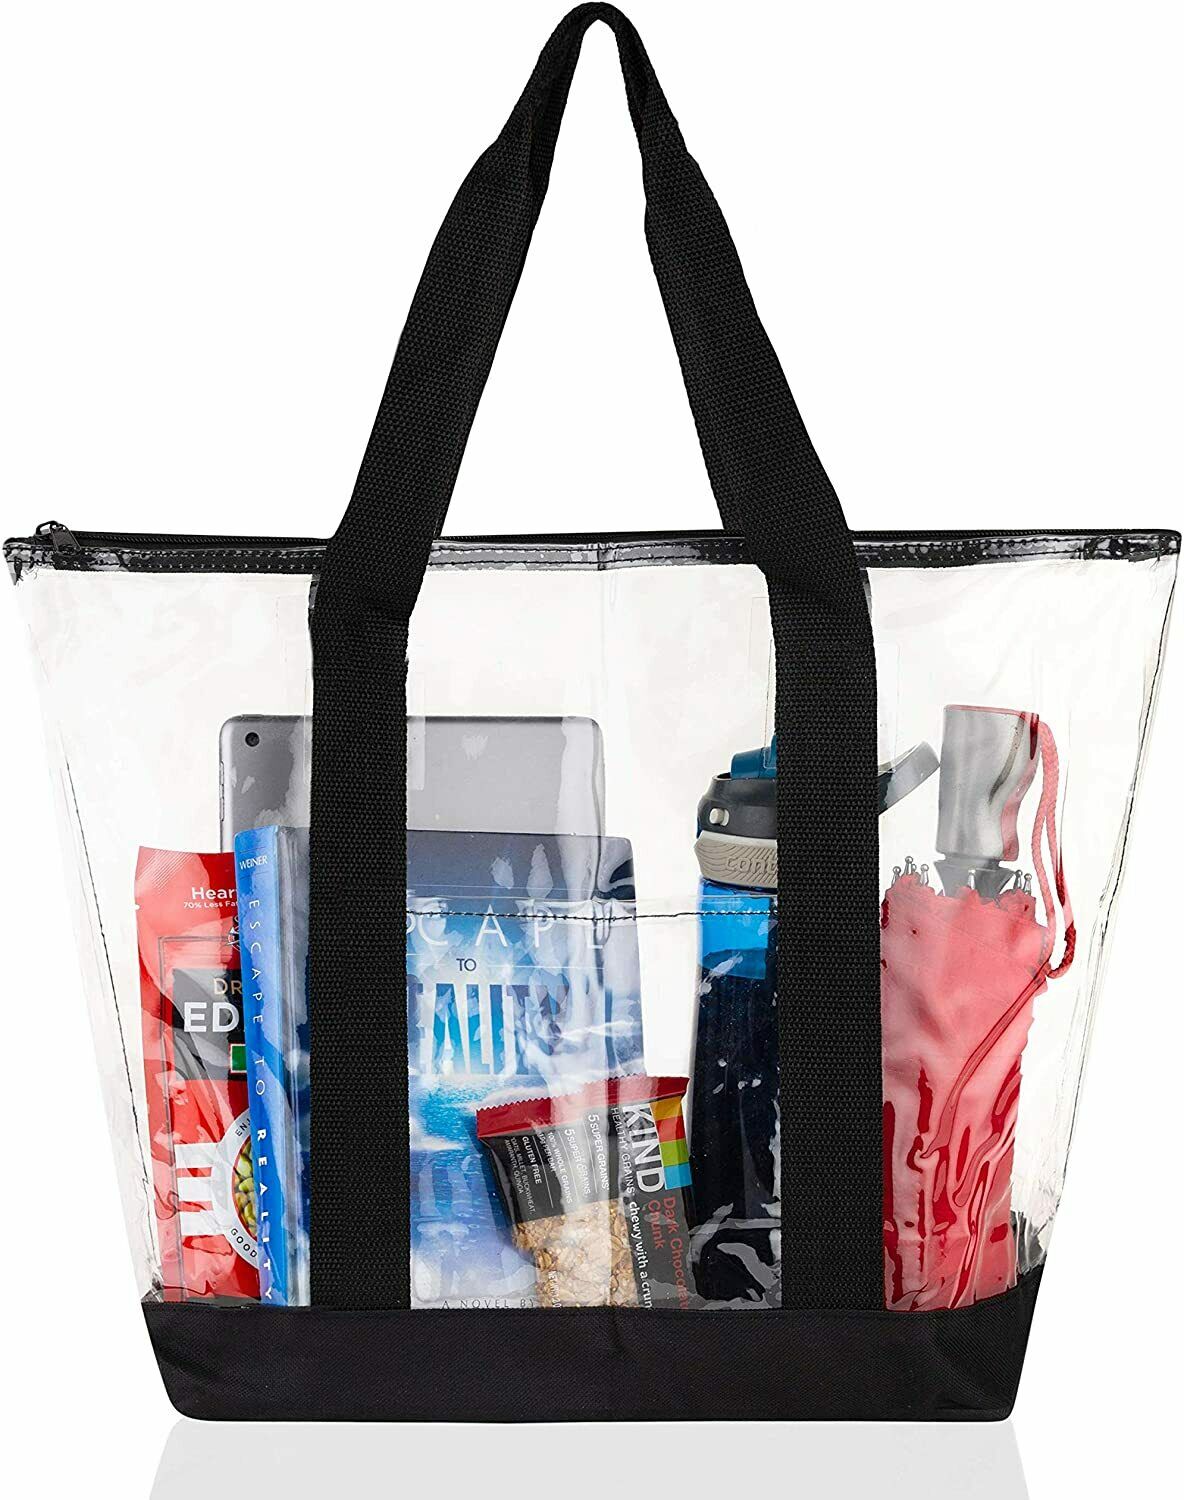 [2 Pack] Clear Tote Bags for Work, Beach, Stadium, Security Approved